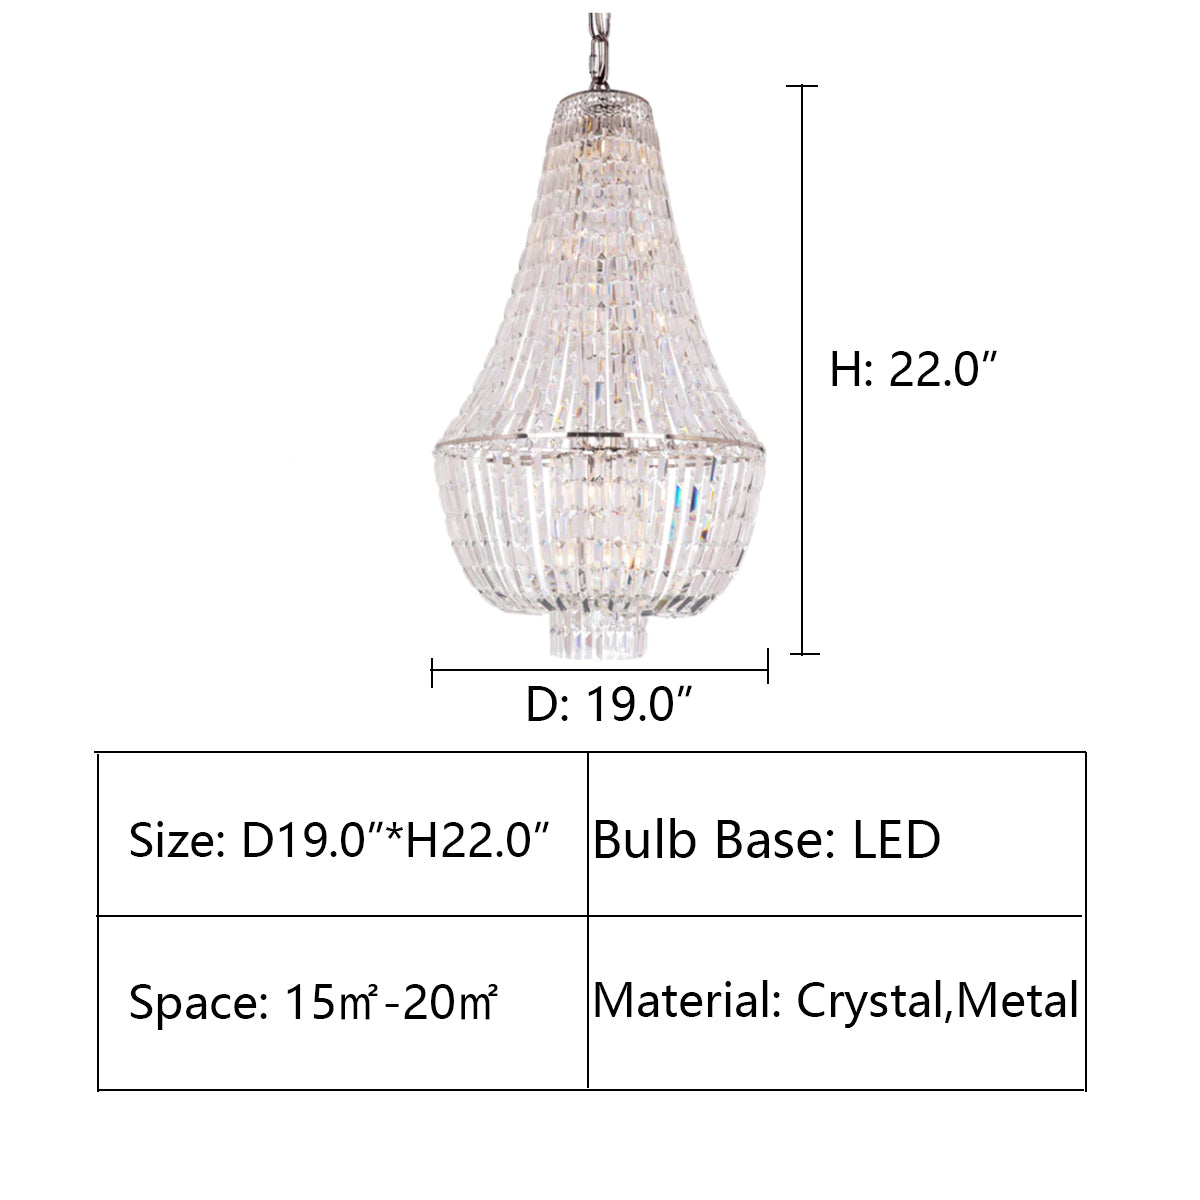 D19.0"*H22.0" Andreas Empire Crystal Prysm Chandelier,chandelier,chandeliers,empire,round,crystal,pendant,metal,crystal chain,ceiling,oversized,large,extra large,huge,stairs,foyer,living room,entrys,hallway